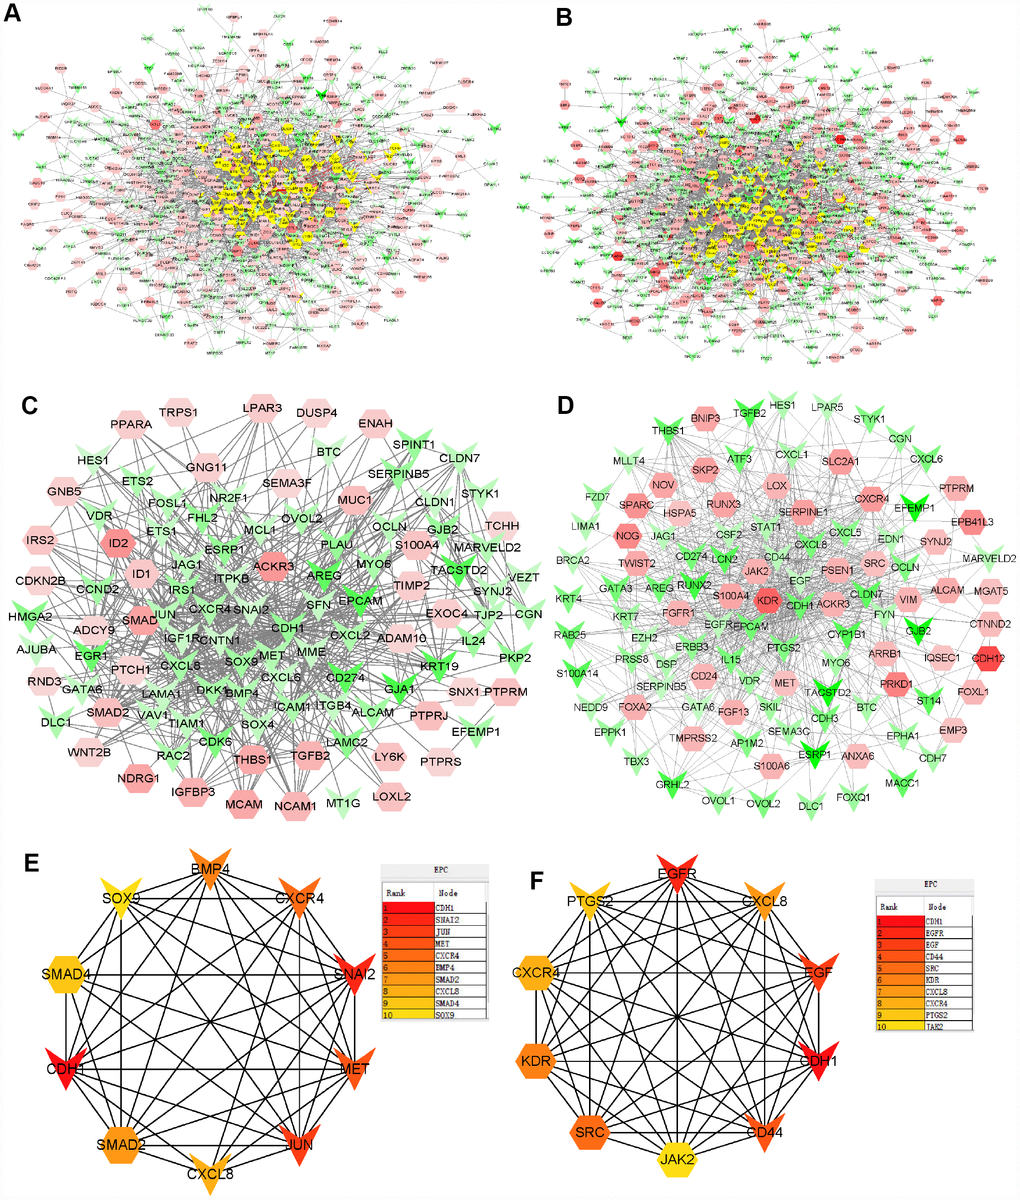 PPI networks constructed using the DEGs from microarray data. (A) Network of significant proteins from DU145R cells. (B) Network of significant proteins from PC3R cells. (C) Network derived from panel A with first-stage nodes associated with the core proteins S100A4, ACKR3 and CDH1. (D) Network derived from panel B with first neighbors associated with the core proteins S100A4, ACKR3 and CDH1. (E) Significant hub proteins extracted from network C. (F) Significant hub proteins extracted from network D. Red and green intensities indicate the degree of upregulation and downregulation, respectively.